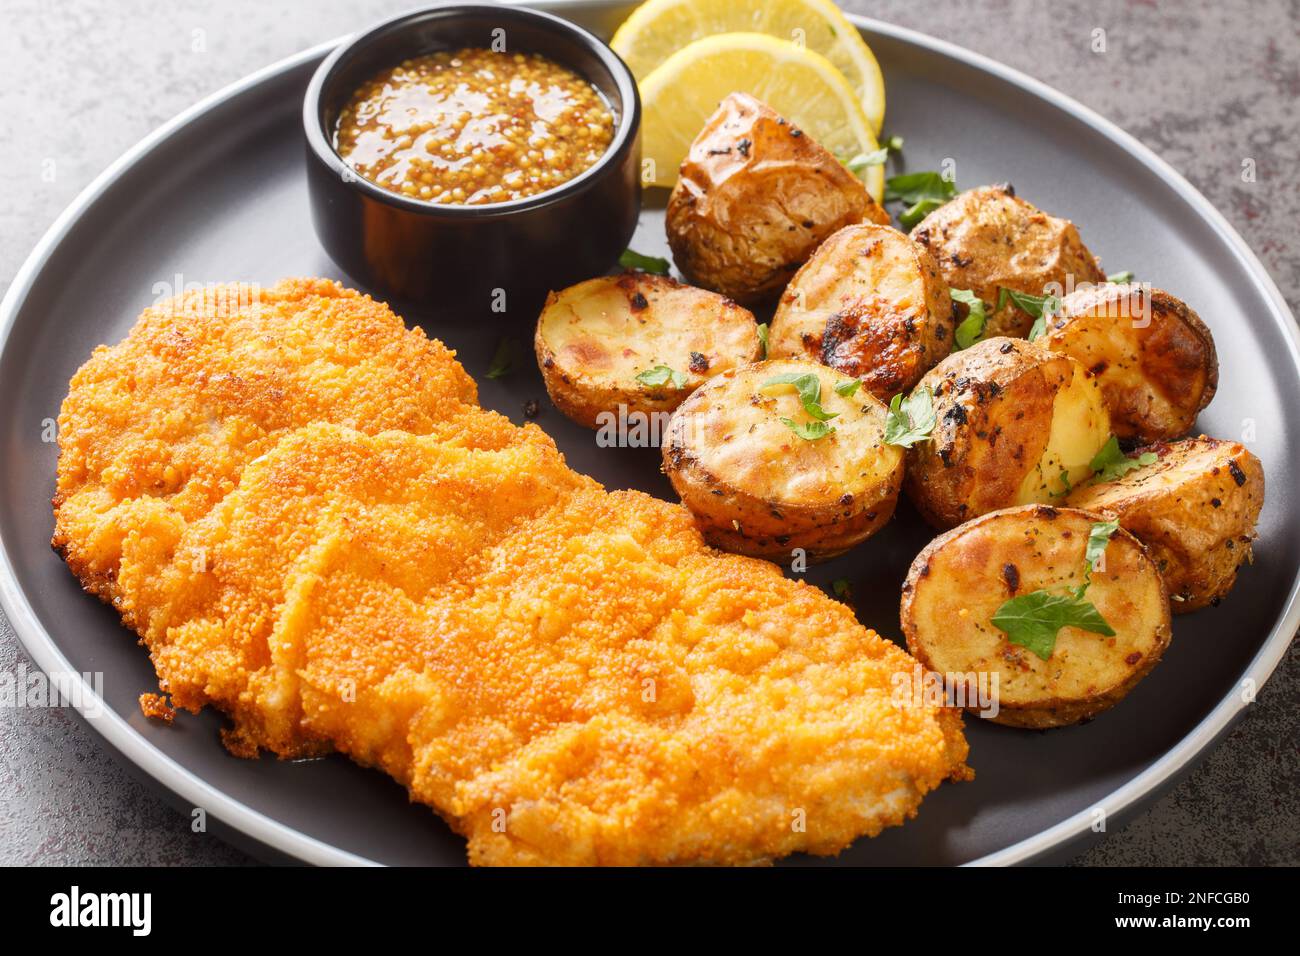 Munich schnitzel served with baked potatoes and mustard close-up in a plate on the table. horizontal Stock Photo